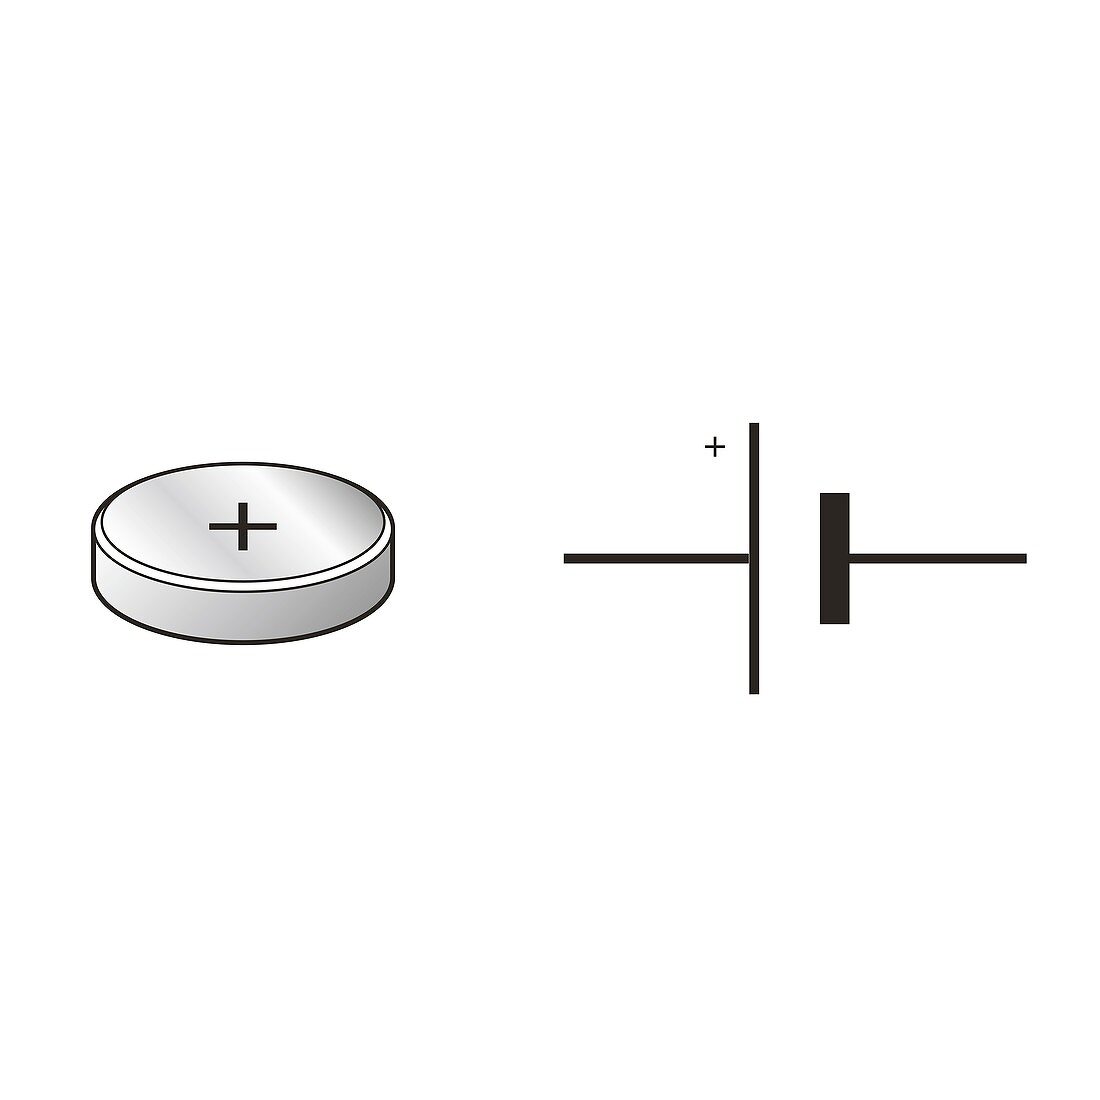 Electric cell and circuit symbol, illustration